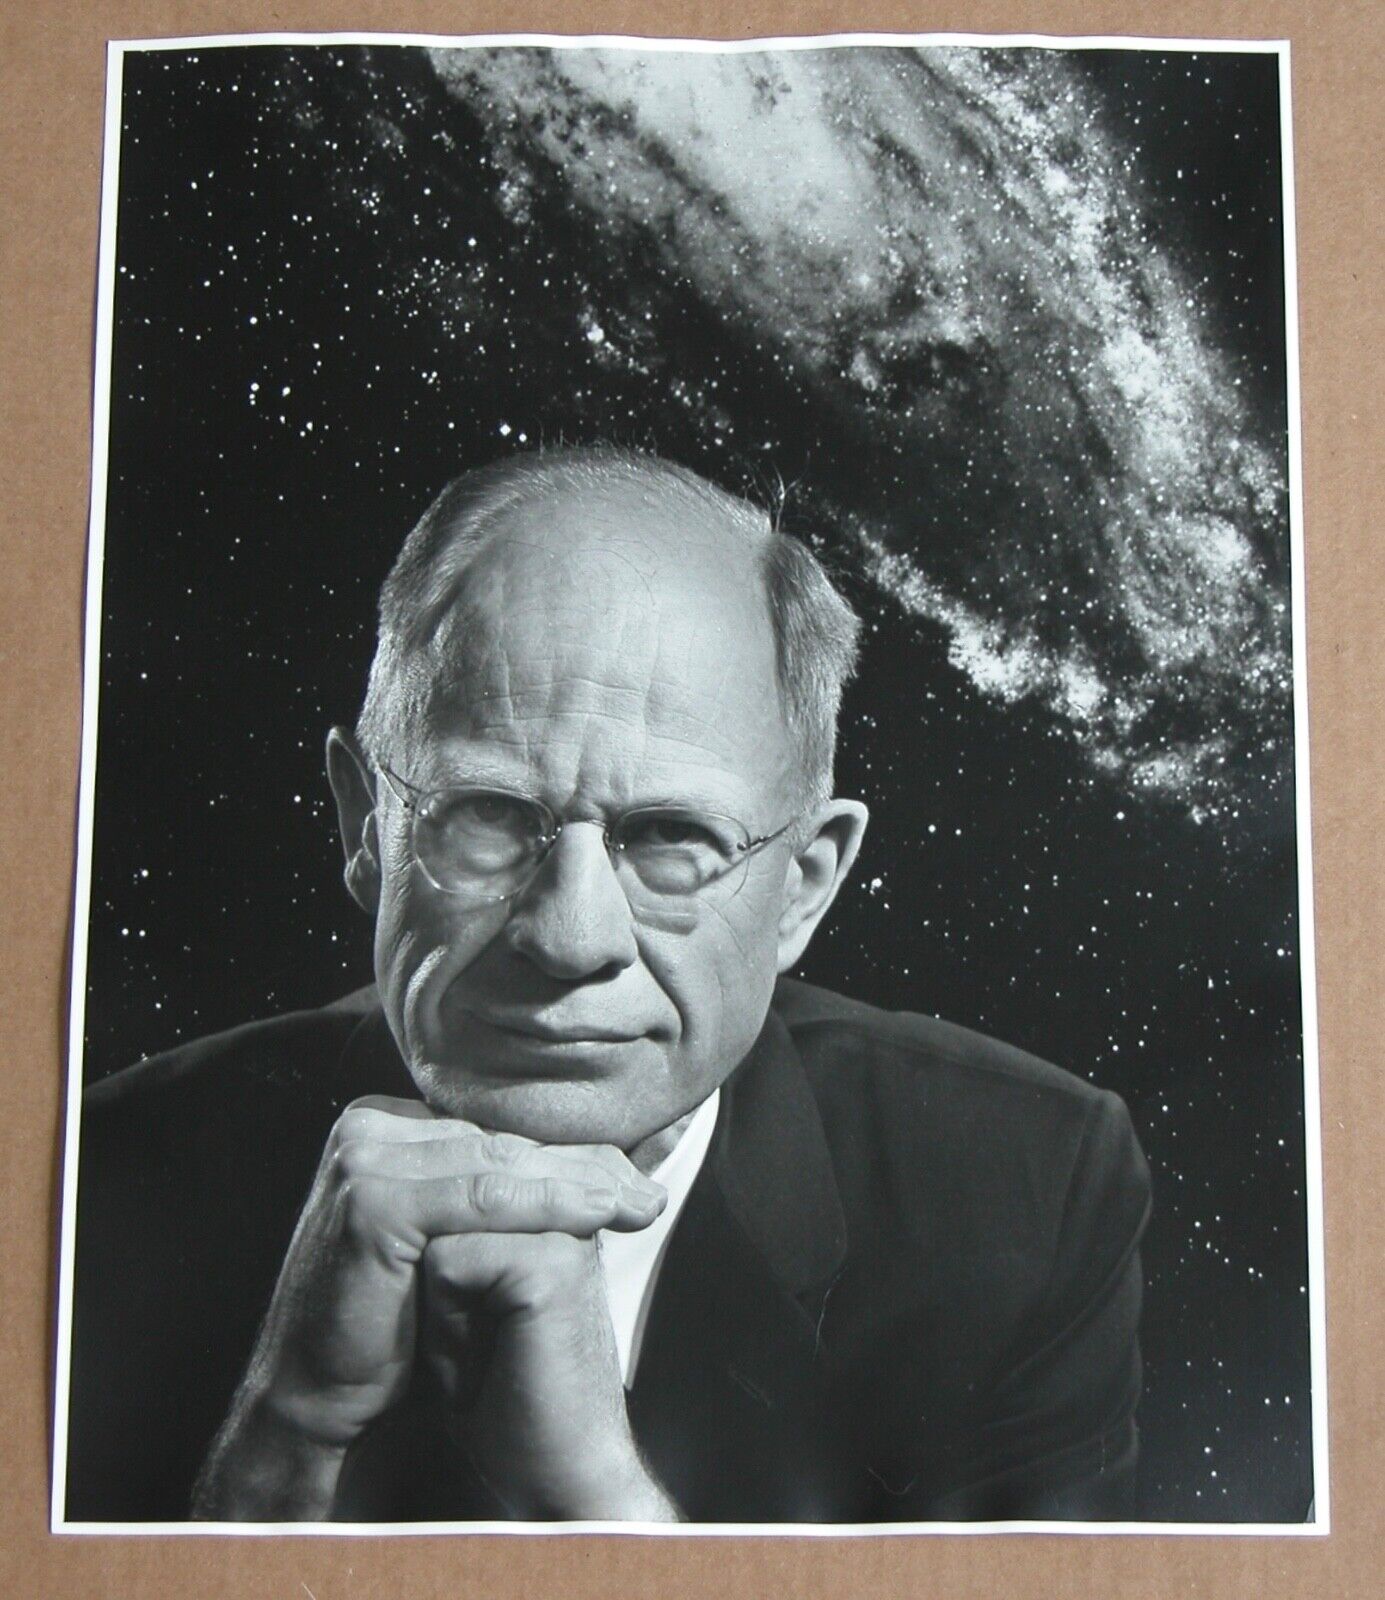 Dr. Clarence Cleminshaw 1960s 11X14 Archival Photograph Dave Iwerks Astronomer